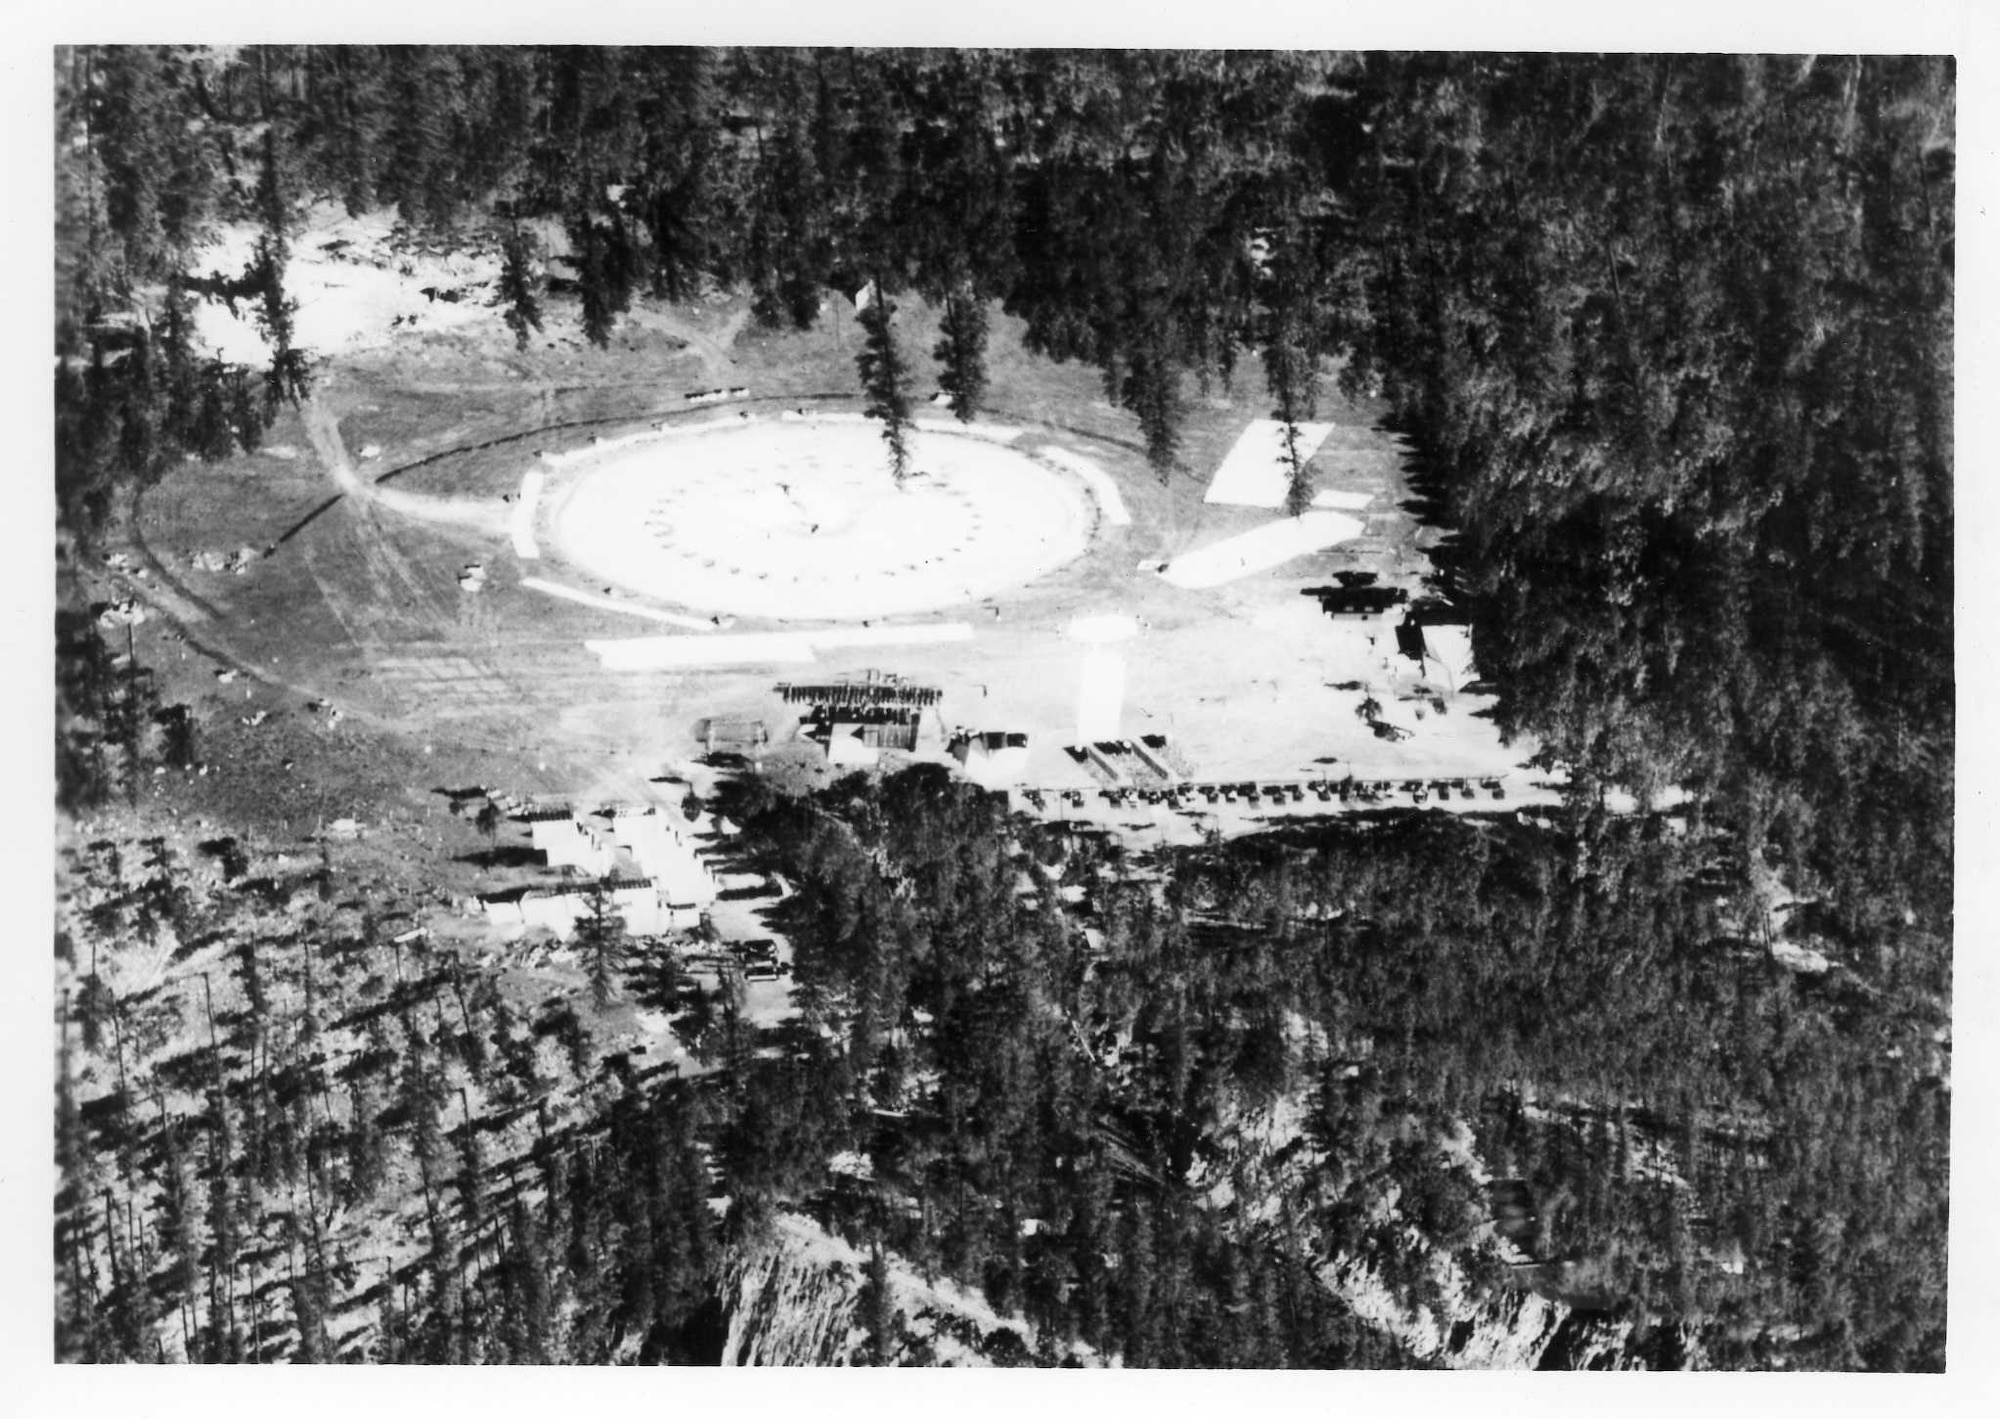 The Stratobowl launch site in the Black Hills area of Rapid City, S.D. has seen an estimated 30 balloon launches, including the liftoff of the Explorer I and II in the 1930s. The high-walled natural depression is about 200 meters wide and sits about 1.5 miles from Route 16 in Rapid City. (U.S. Air Force courtesy photo/Released)